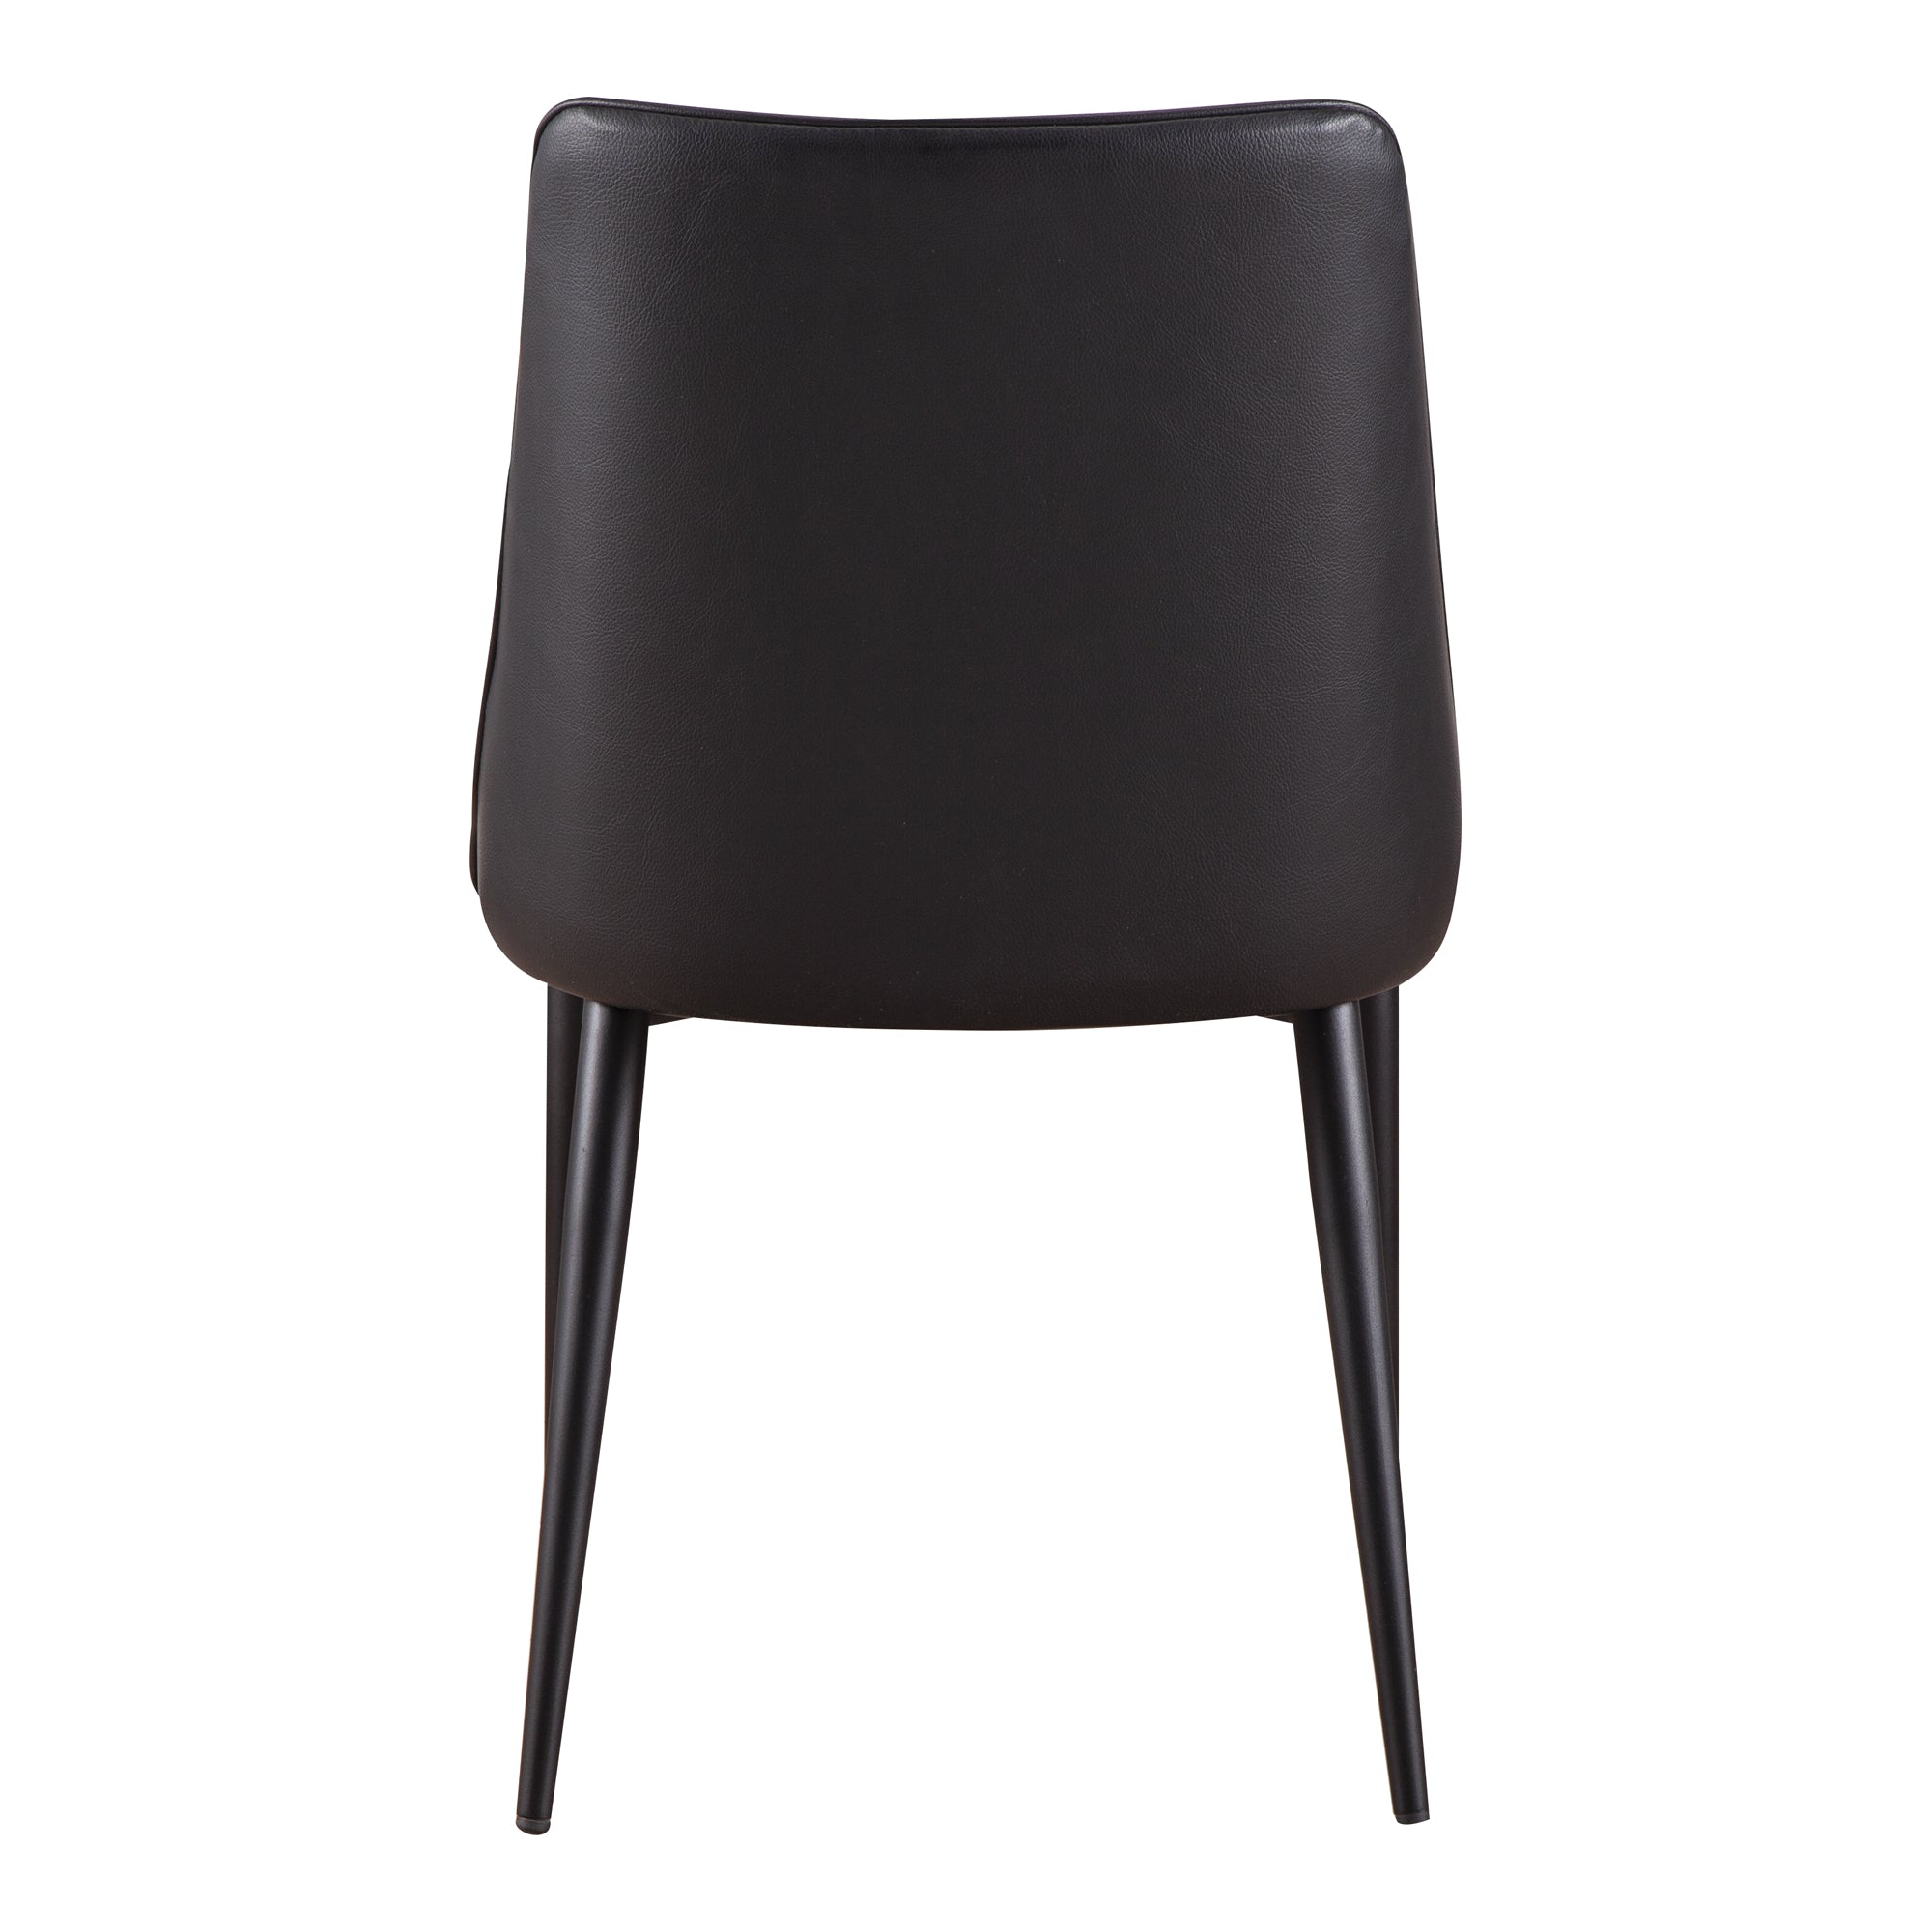 Lula Dining Chair Black Vegan Leather - Set Of Two